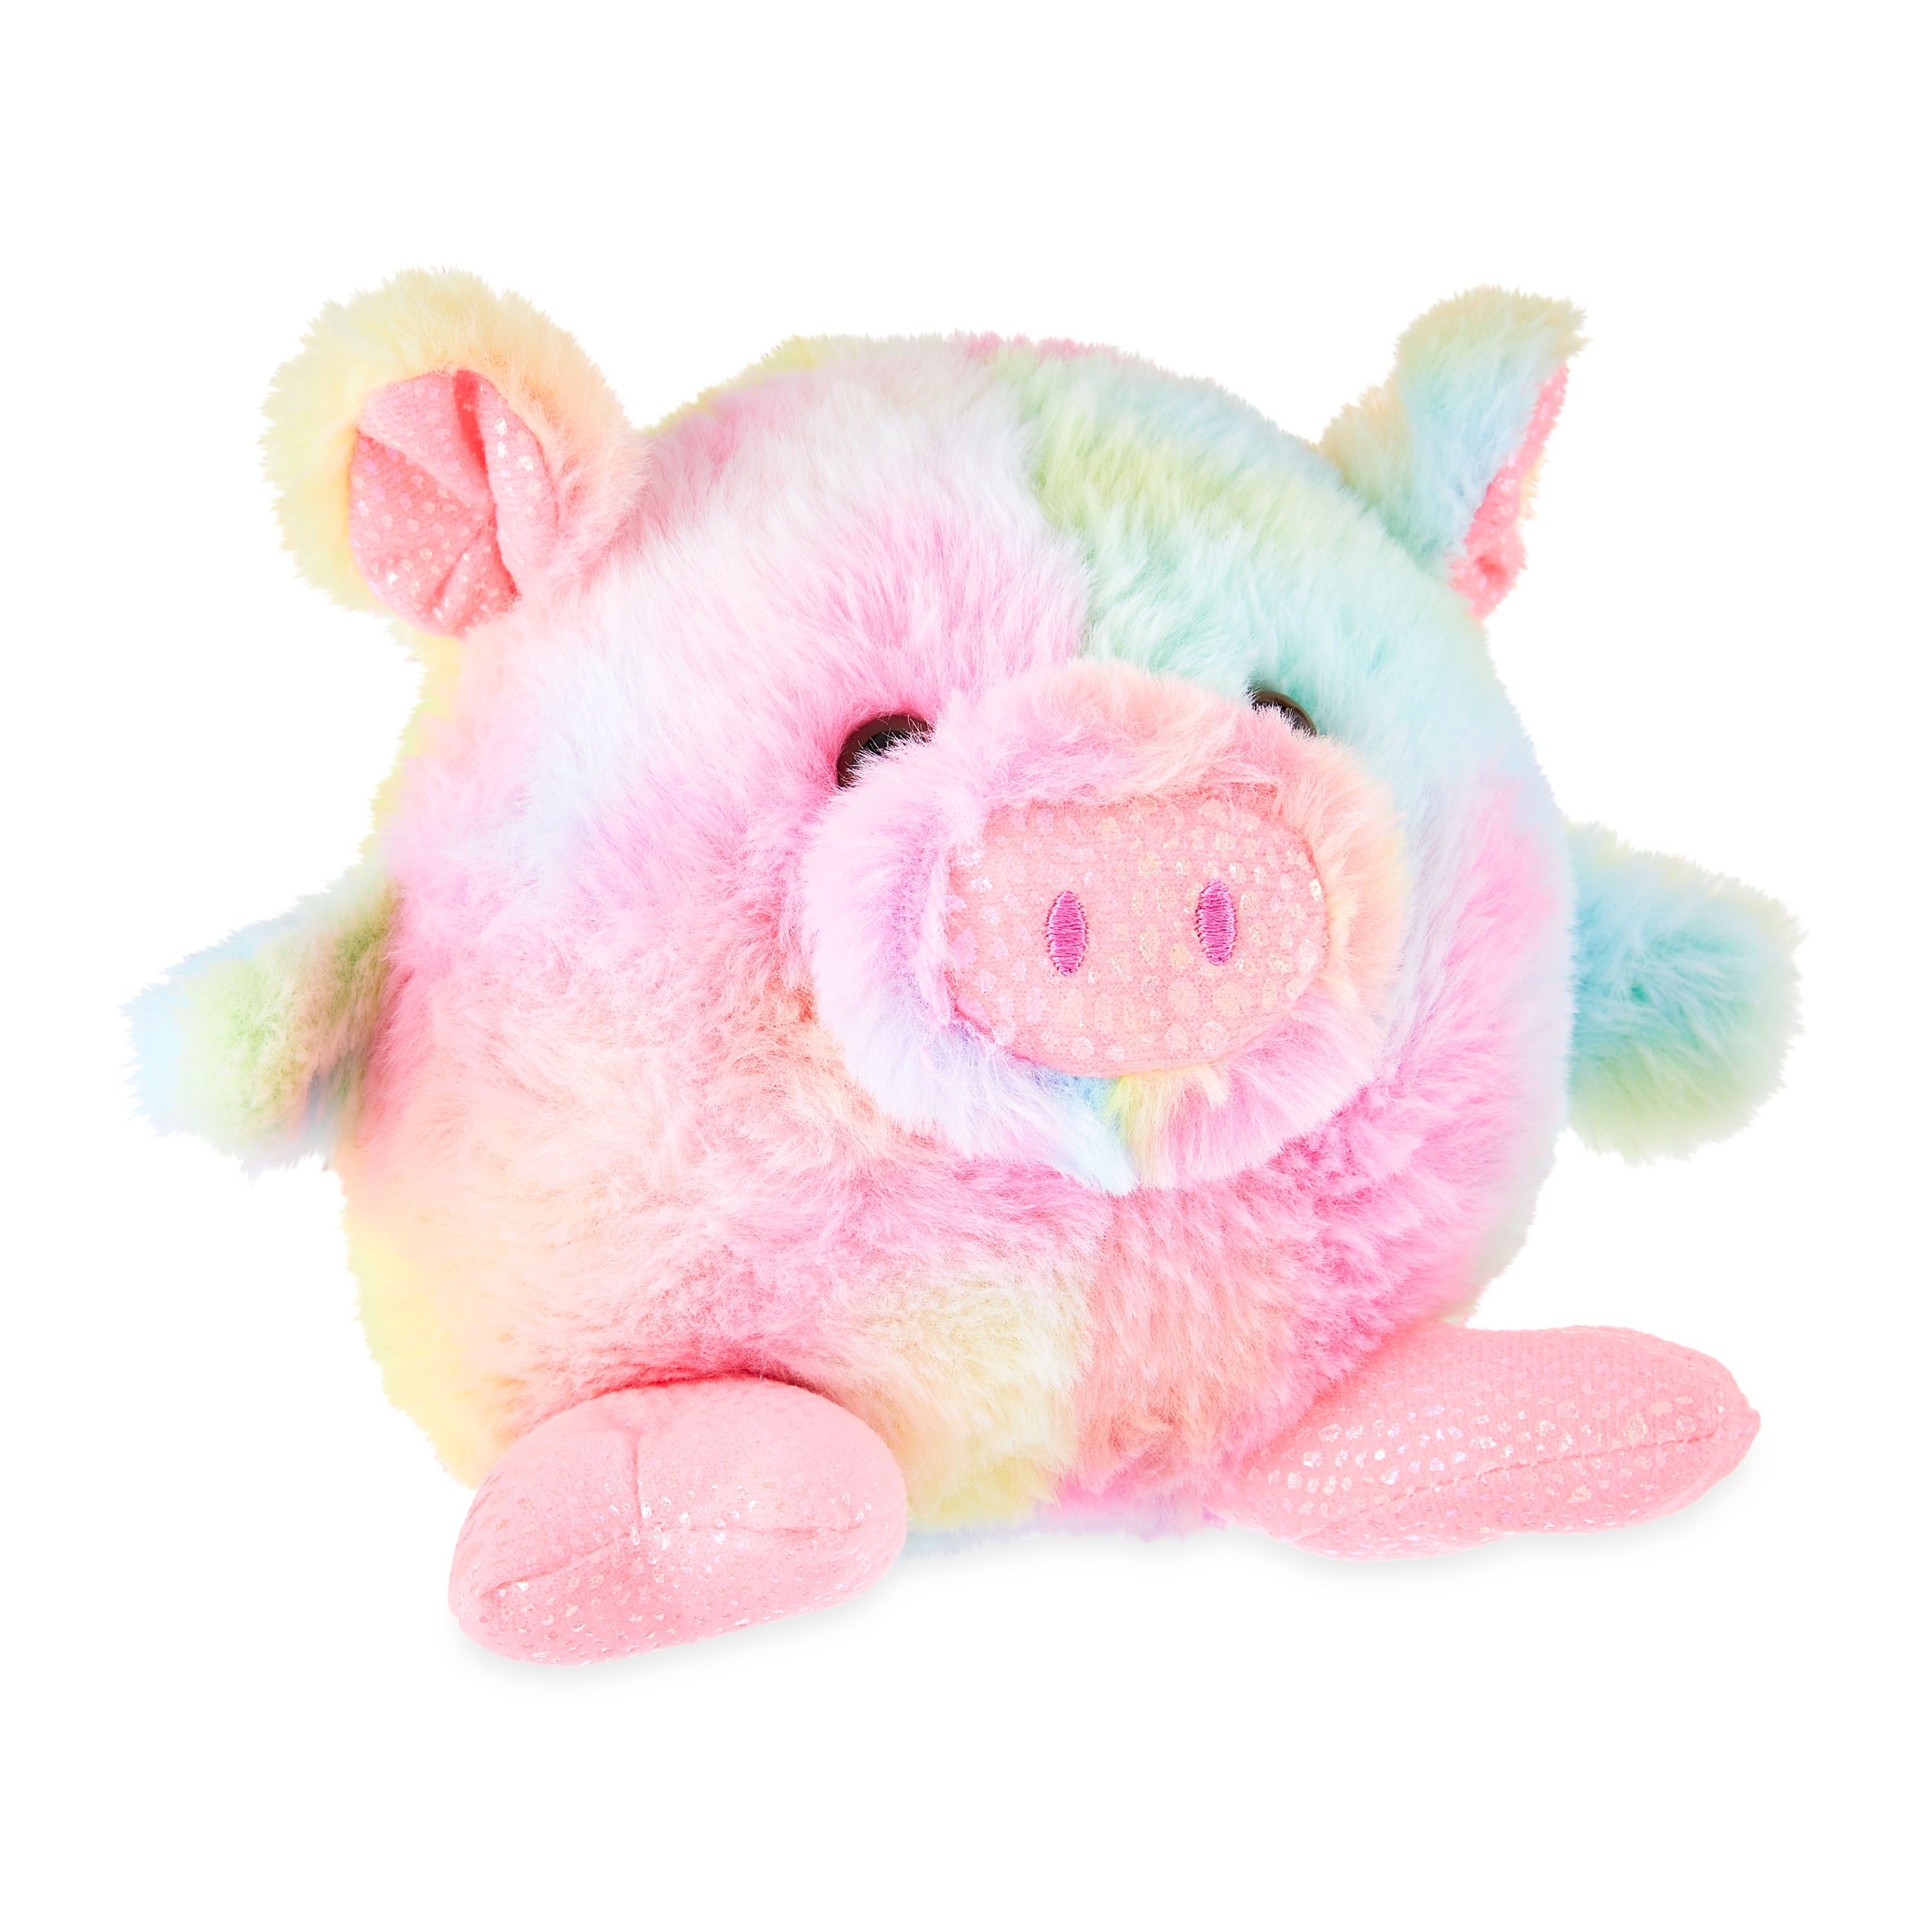 "Way to Celebrate! Easter SmallRolypoly Farm Plush Toy, Pig"